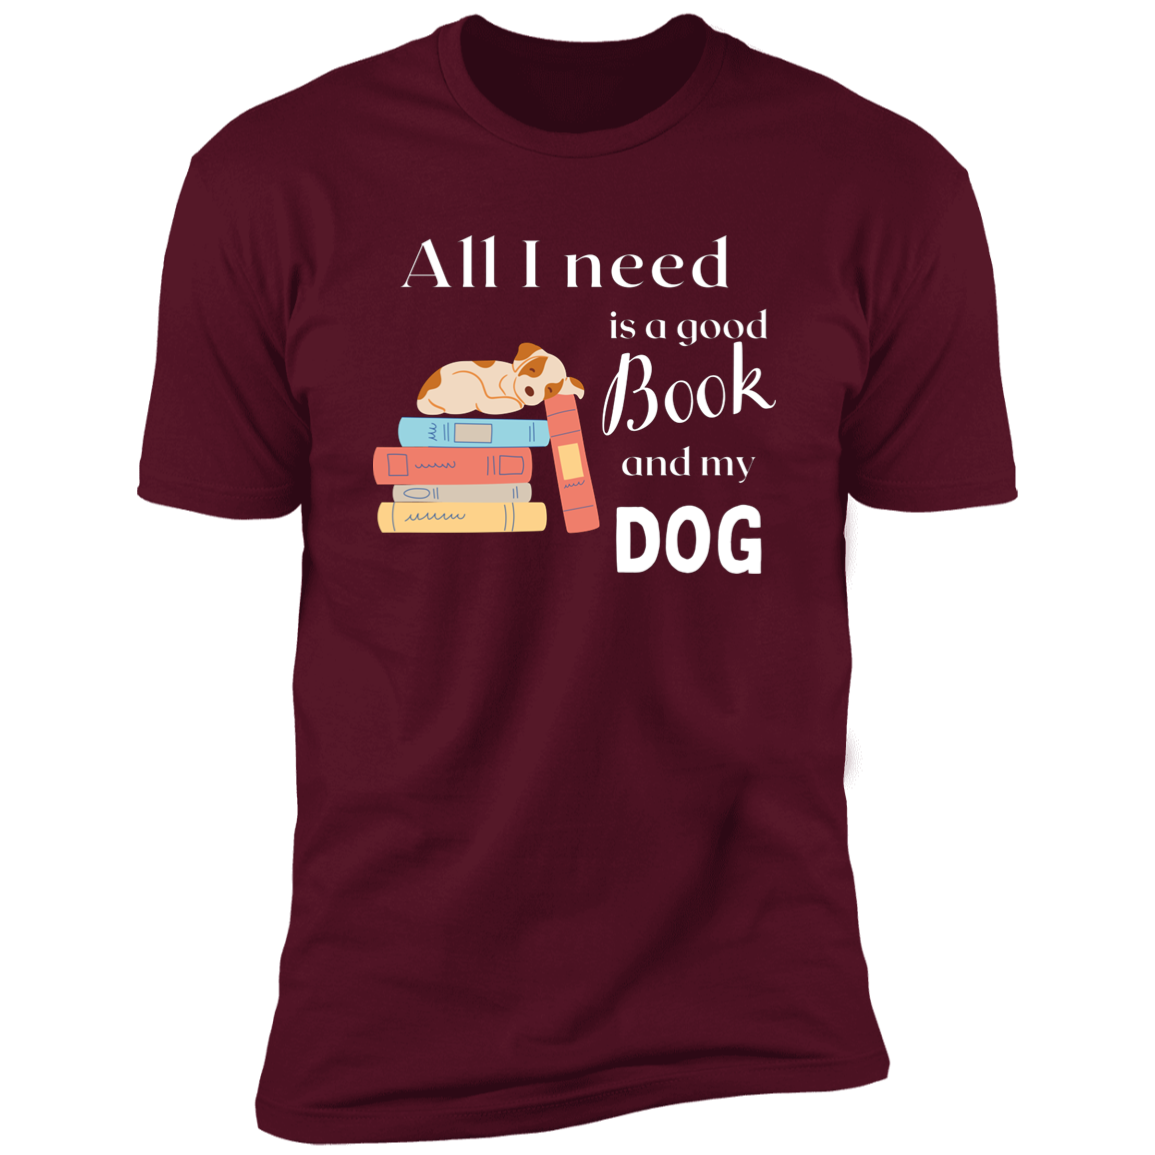 All I Need is a Good Book and My Dog, dog t-shirt for humans, in maroon